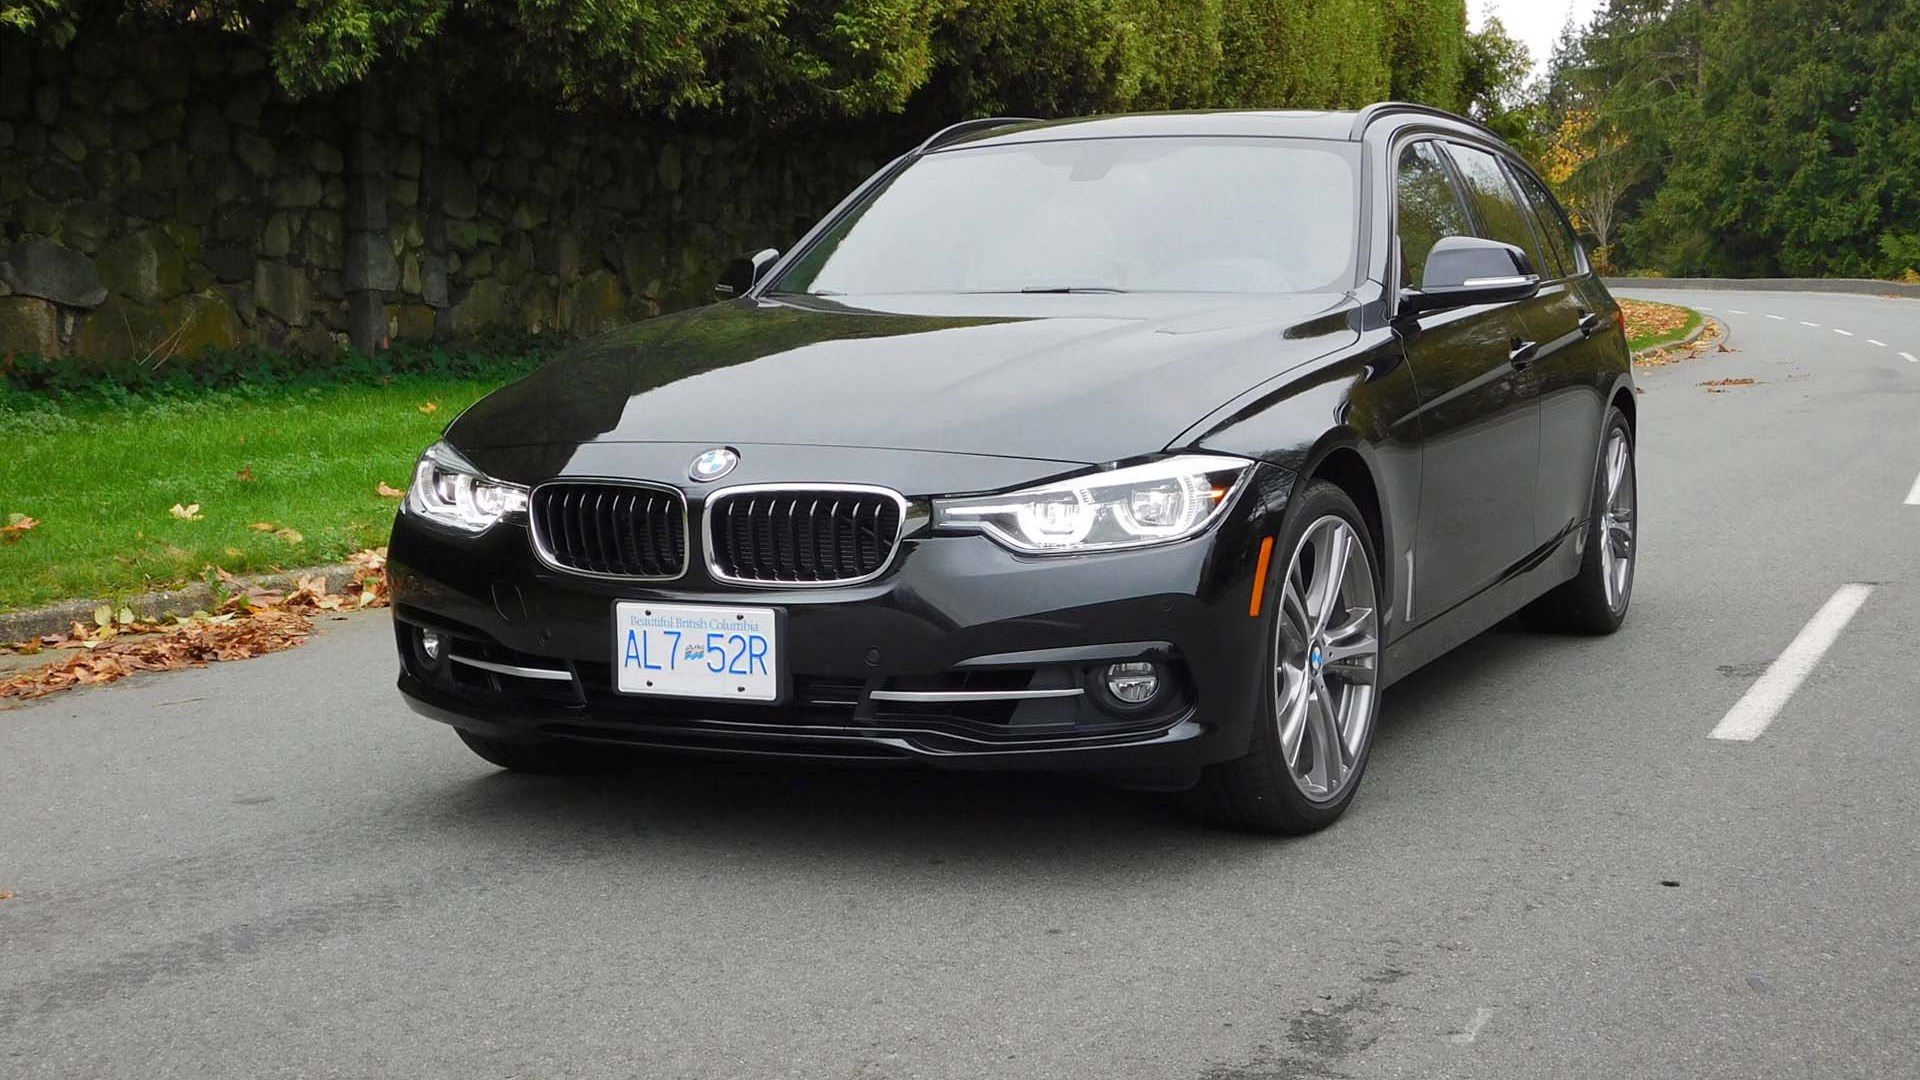 2016 BMW 328i xDrive Touring Test Drive Review | AutoTrader.ca